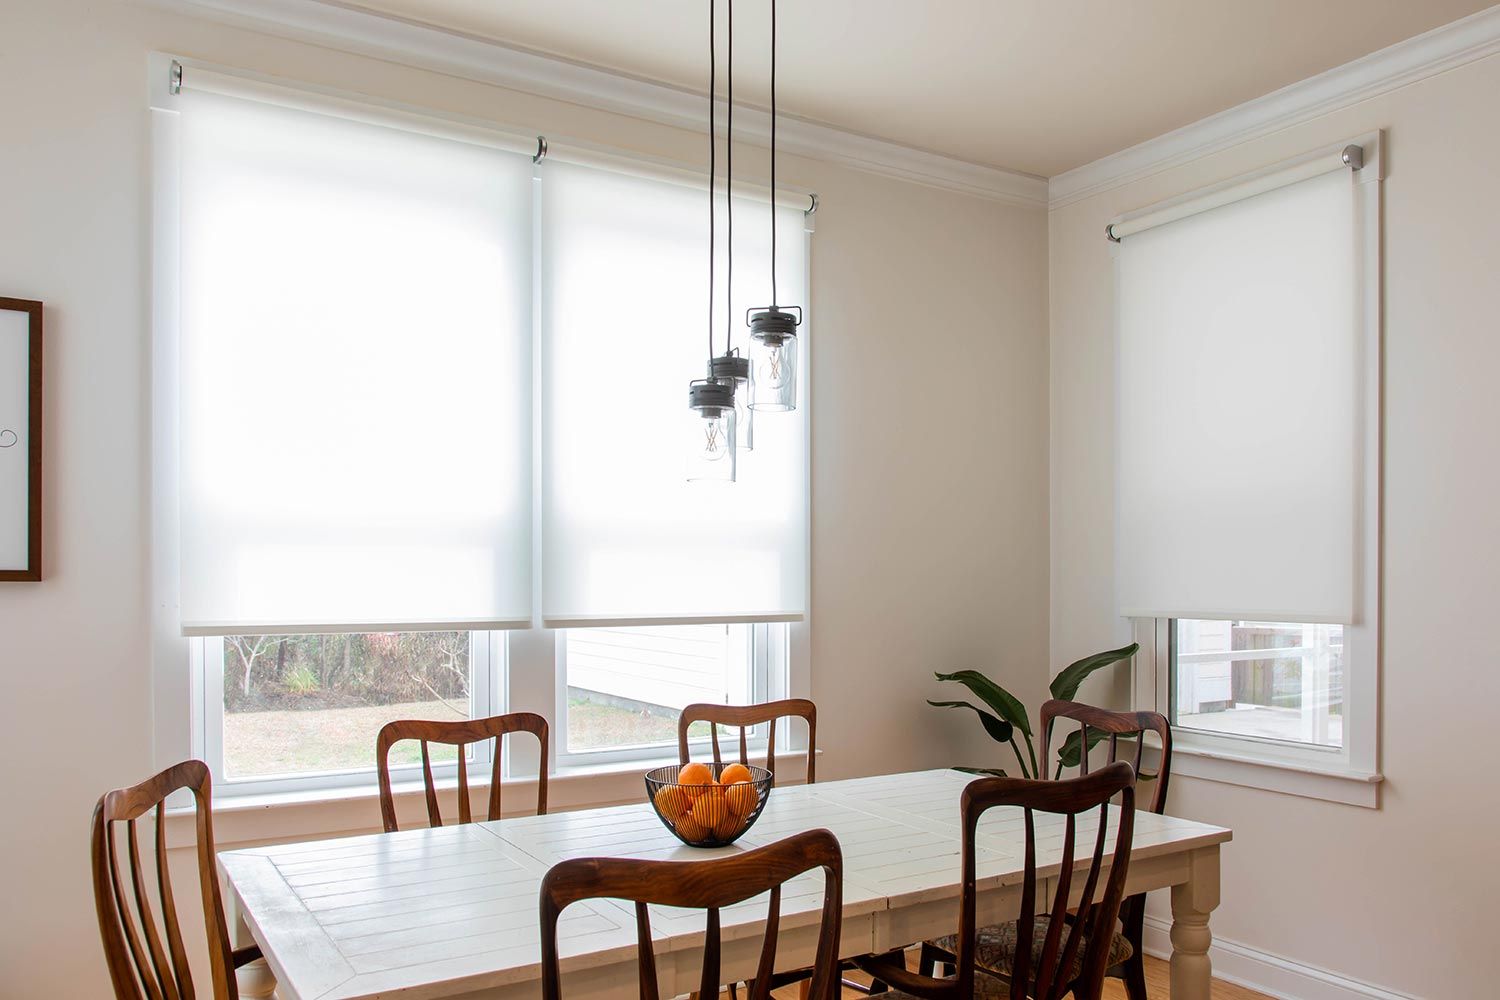 Dining area with Savant white motorized window shades, wooden chairs, and a white dining table.